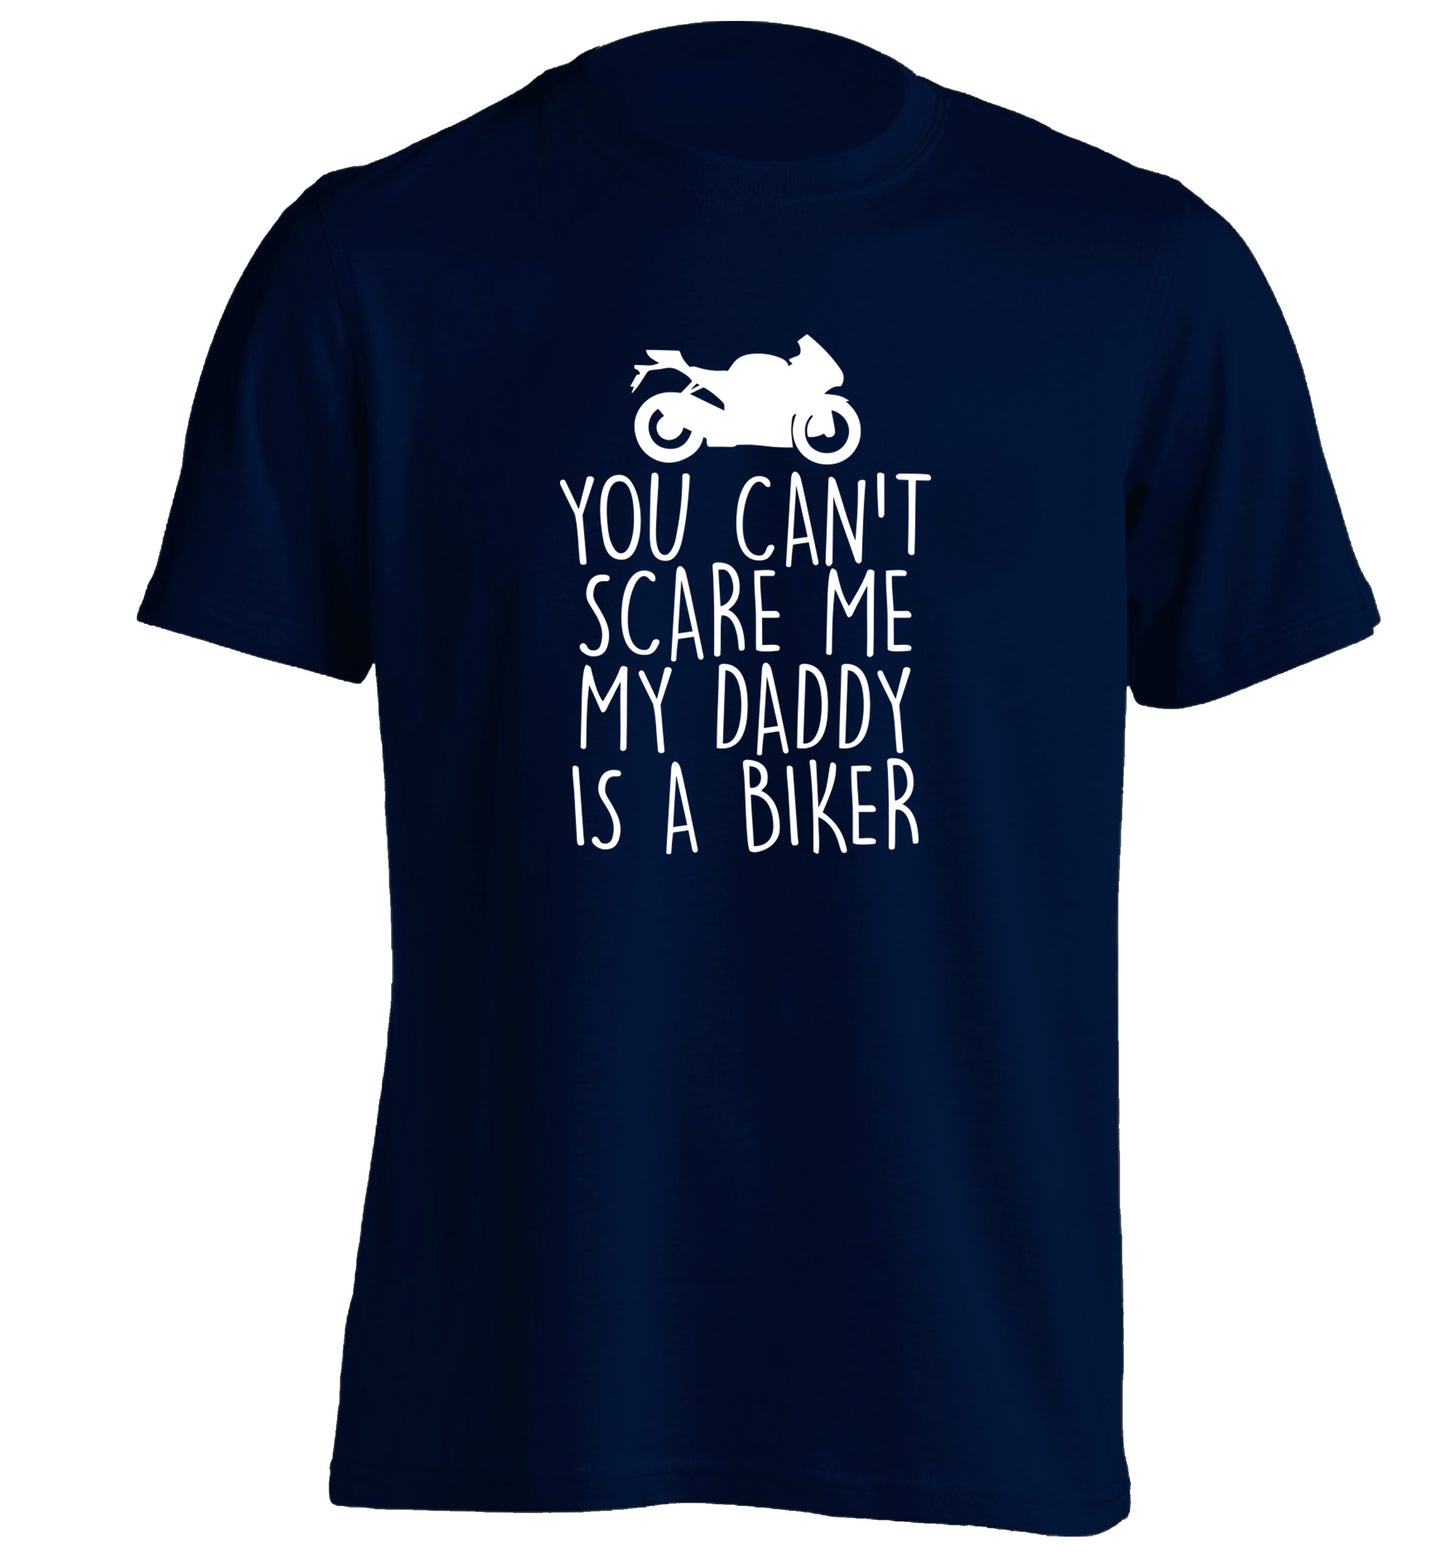 You can't scare me my daddy is a biker adults unisex navy Tshirt 2XL